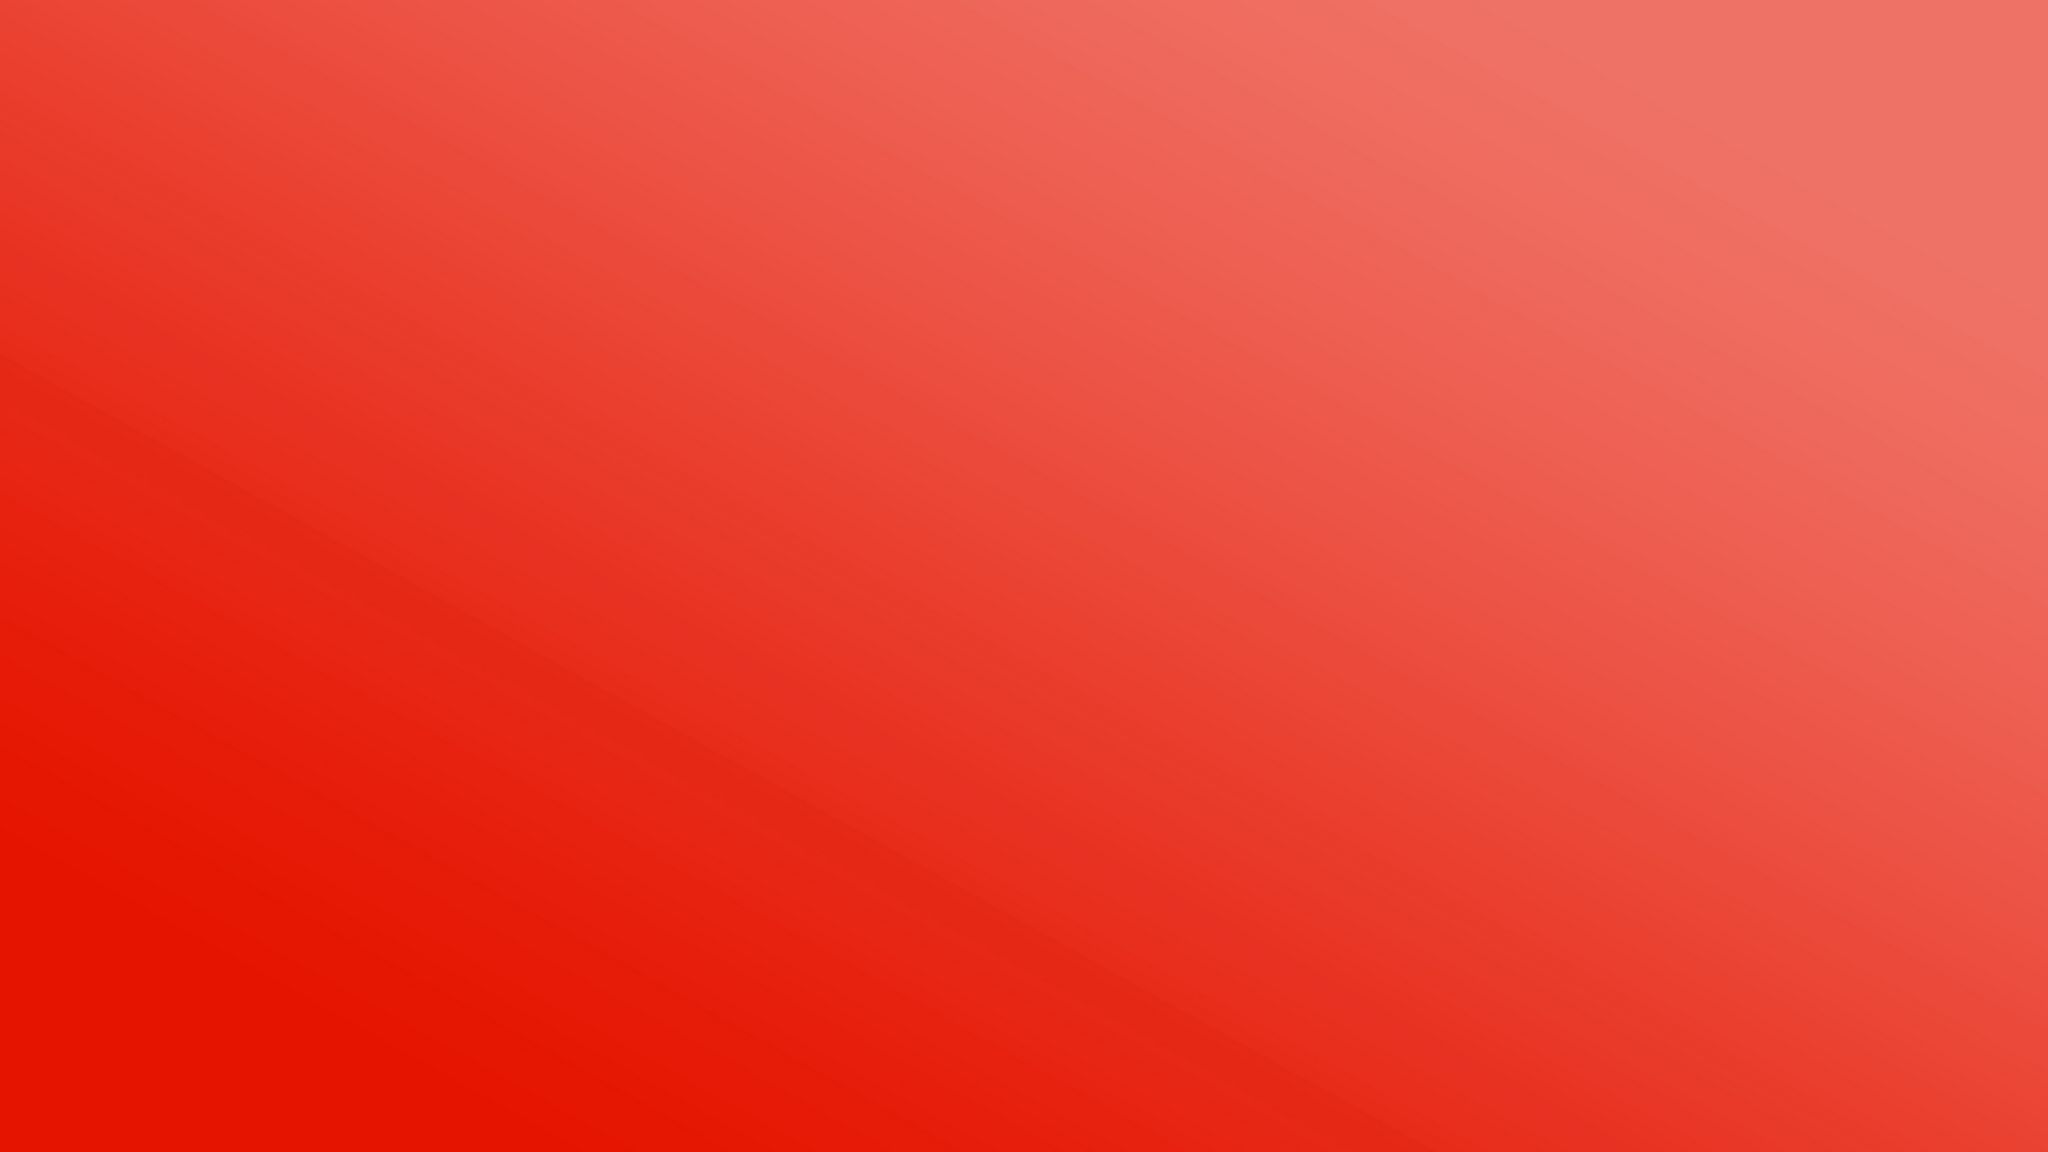 Download wallpaper 2048x1152 red, solid, light, bright, scarlet ultrawide monitor HD background